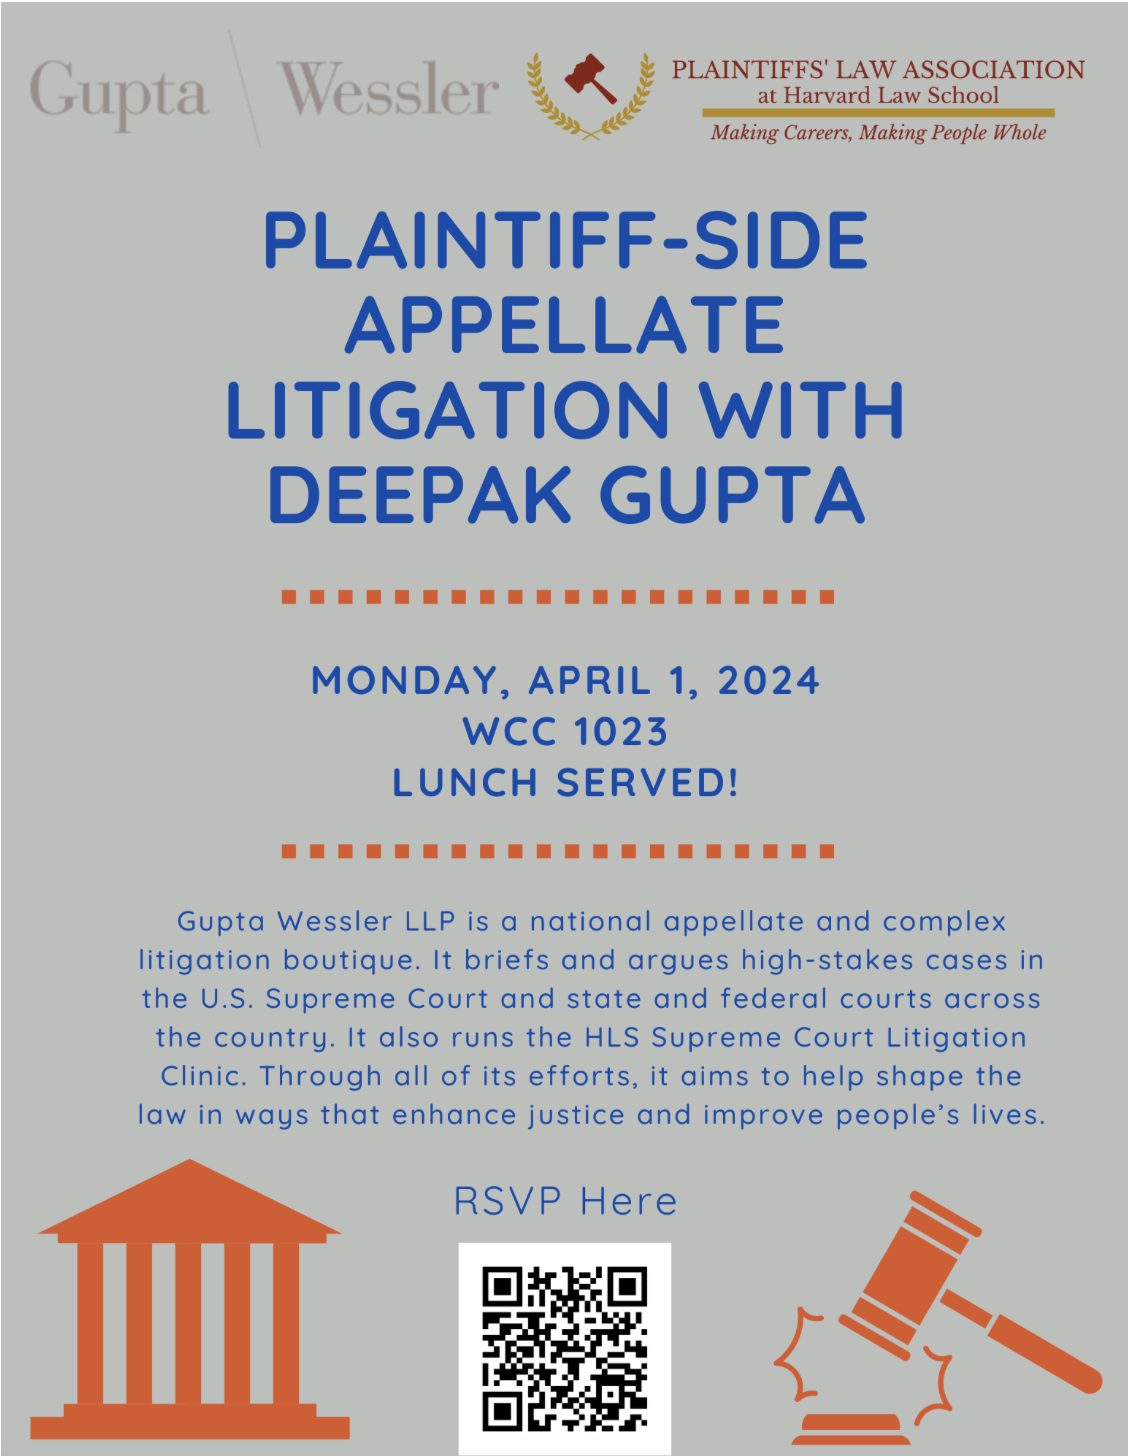 Plaintiff-Side Appellate Litigation with Deepak Gupta Monday, April 01 12:20 PM – 1:20 PM, WCC 1023 Gupta Wessler LLP is a national appellate and complex litigation boutique. It briefs and argues high-stakes cases in the U.S. Supreme Court and state and federal courts across the country. It also runs the HLS Supreme Court Litigation Clinic. Through all of its efforts, it aims to help shape the law in ways that enhance justice and improve people’s lives. RSVP here!